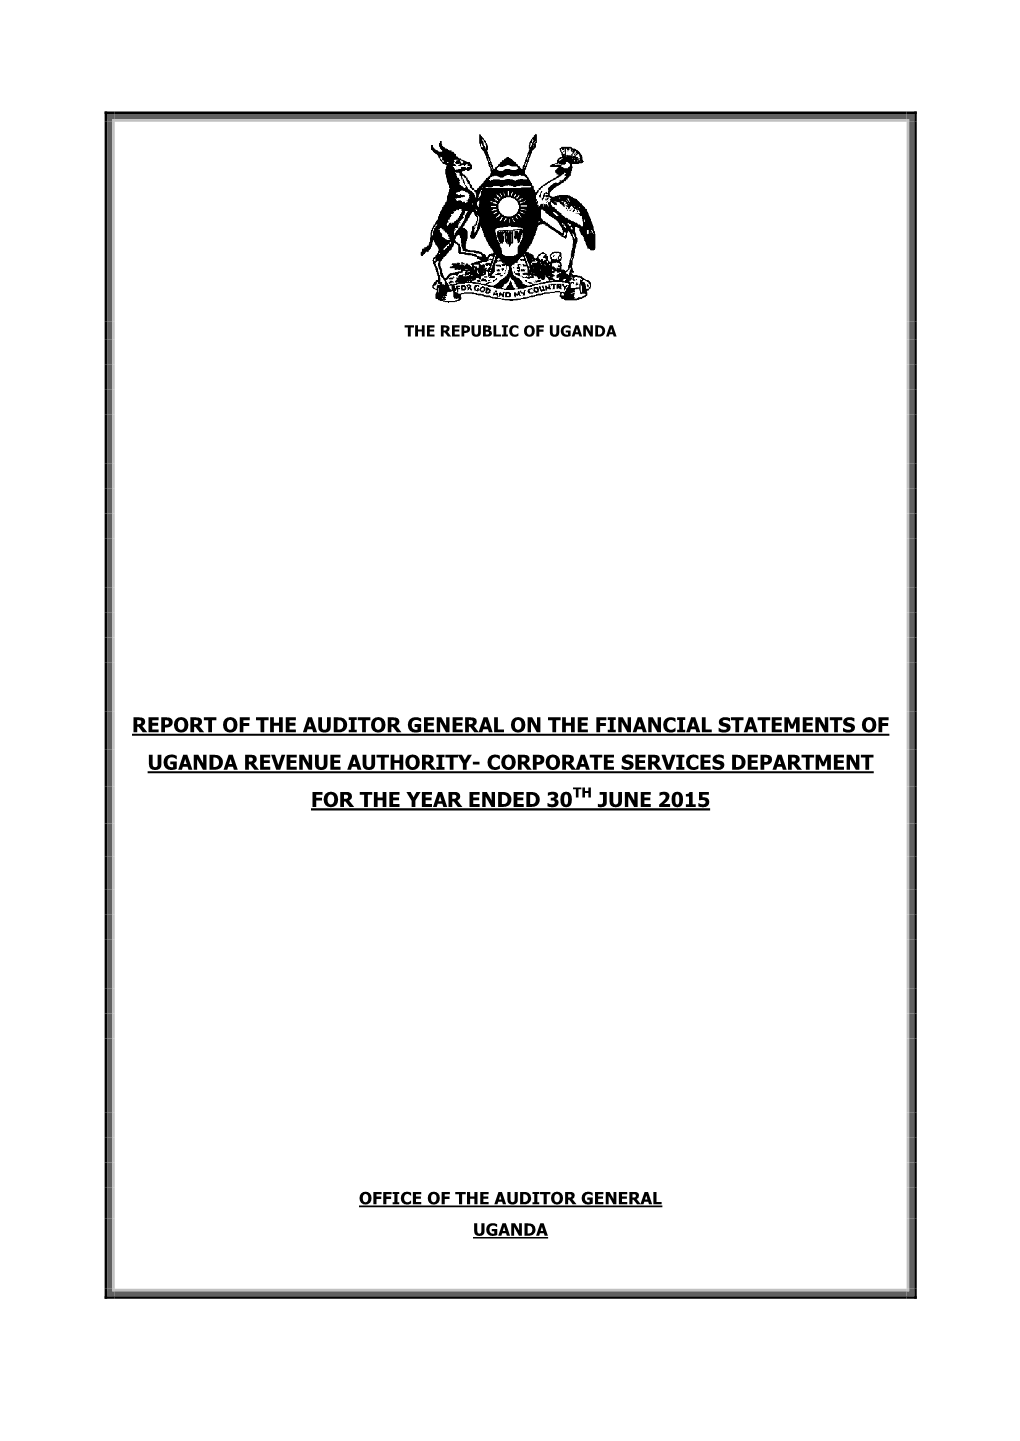 Report of the Auditor General on the Financial Statements of Uganda Revenue Authority- Corporate Services Department for the Year Ended 30Th June 2015